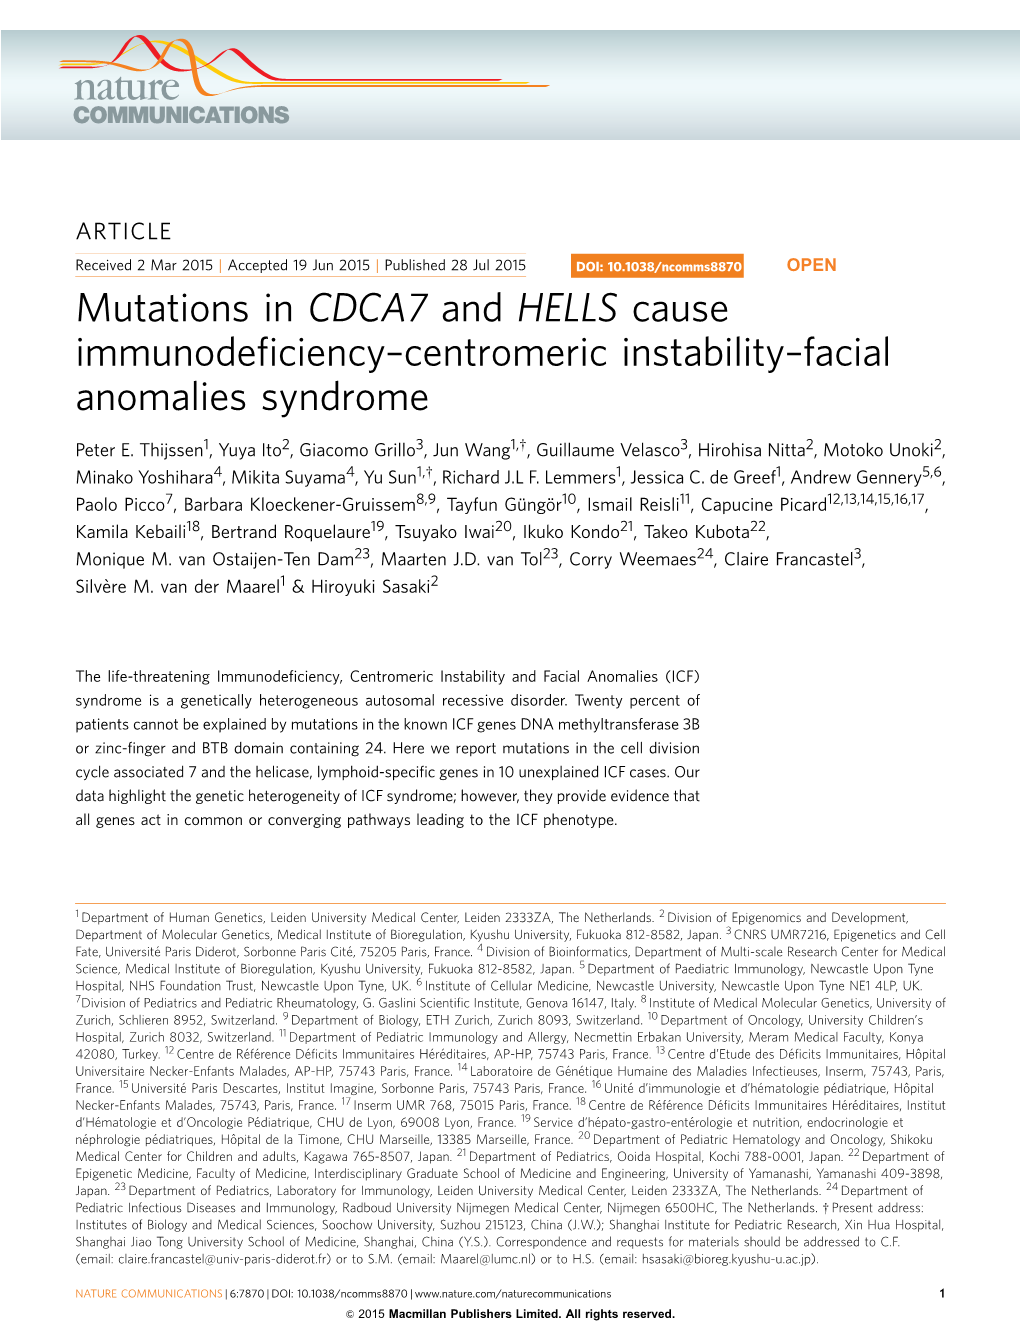 Mutations in CDCA7 and HELLS Cause Immunodeficiency–Centromeric Instability–Facial Anomalies Syndrome